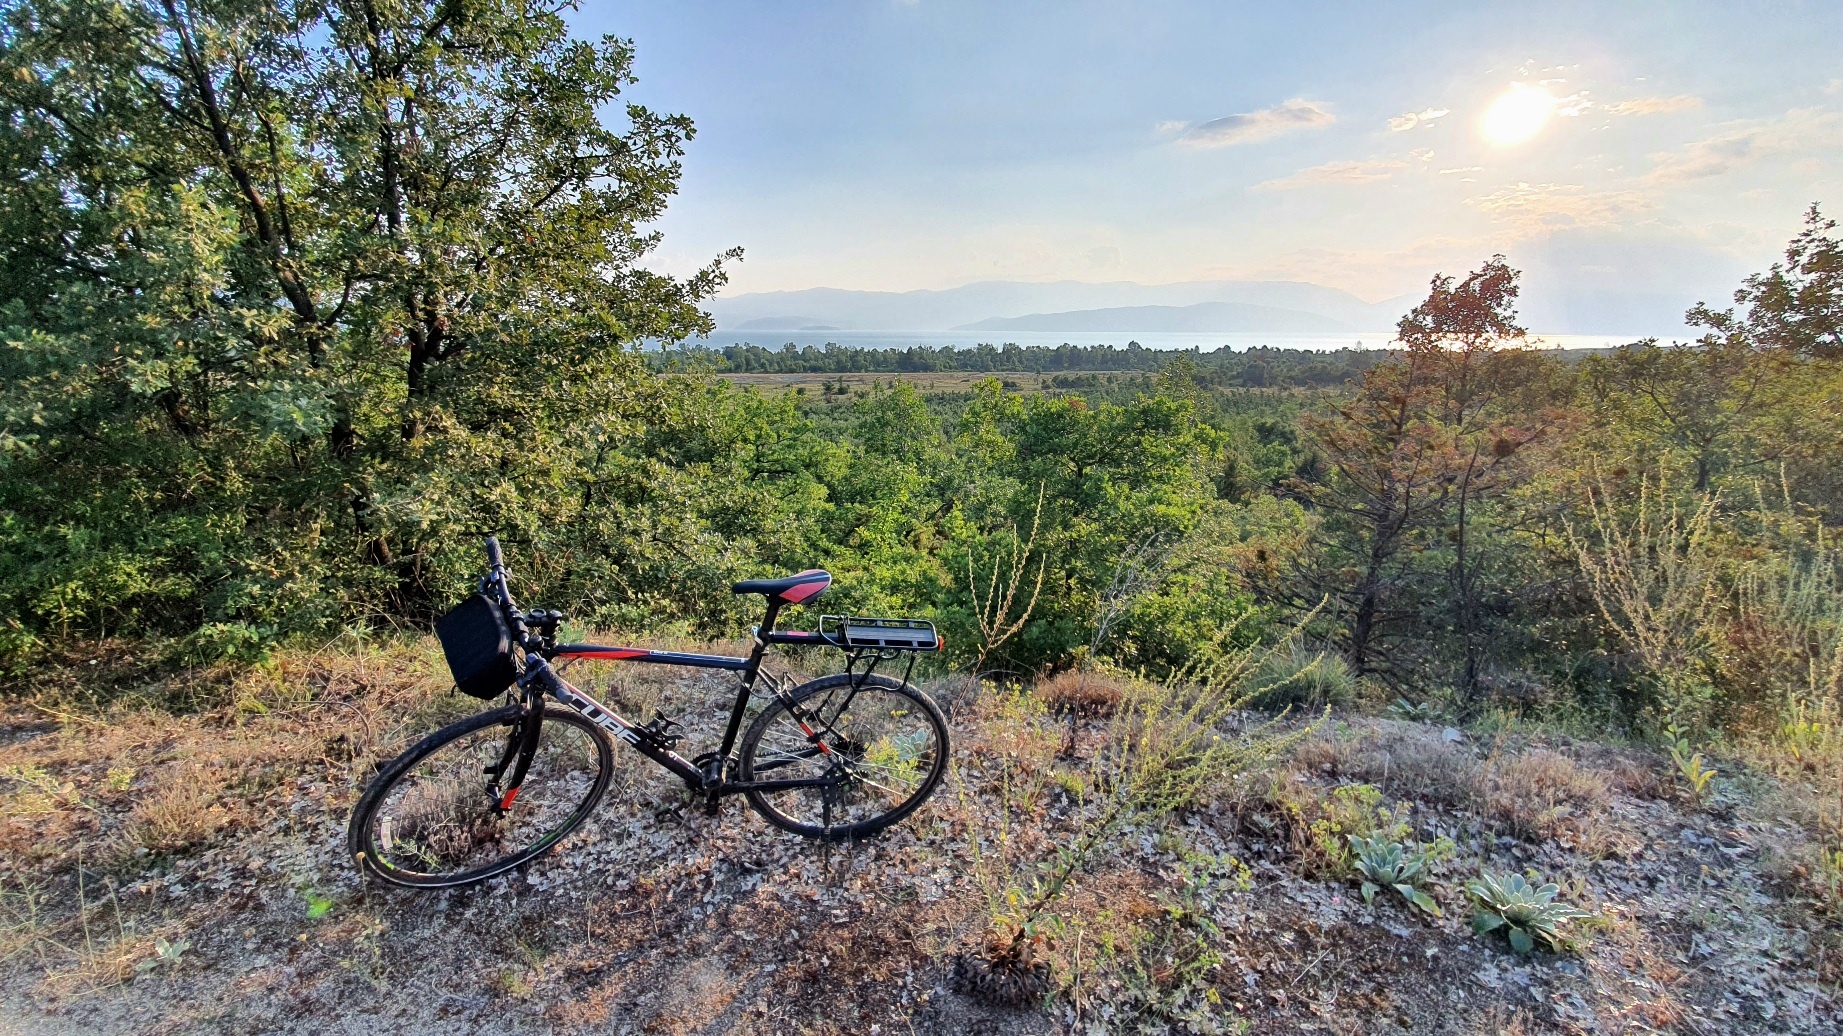 panorama of prespa with parked bike